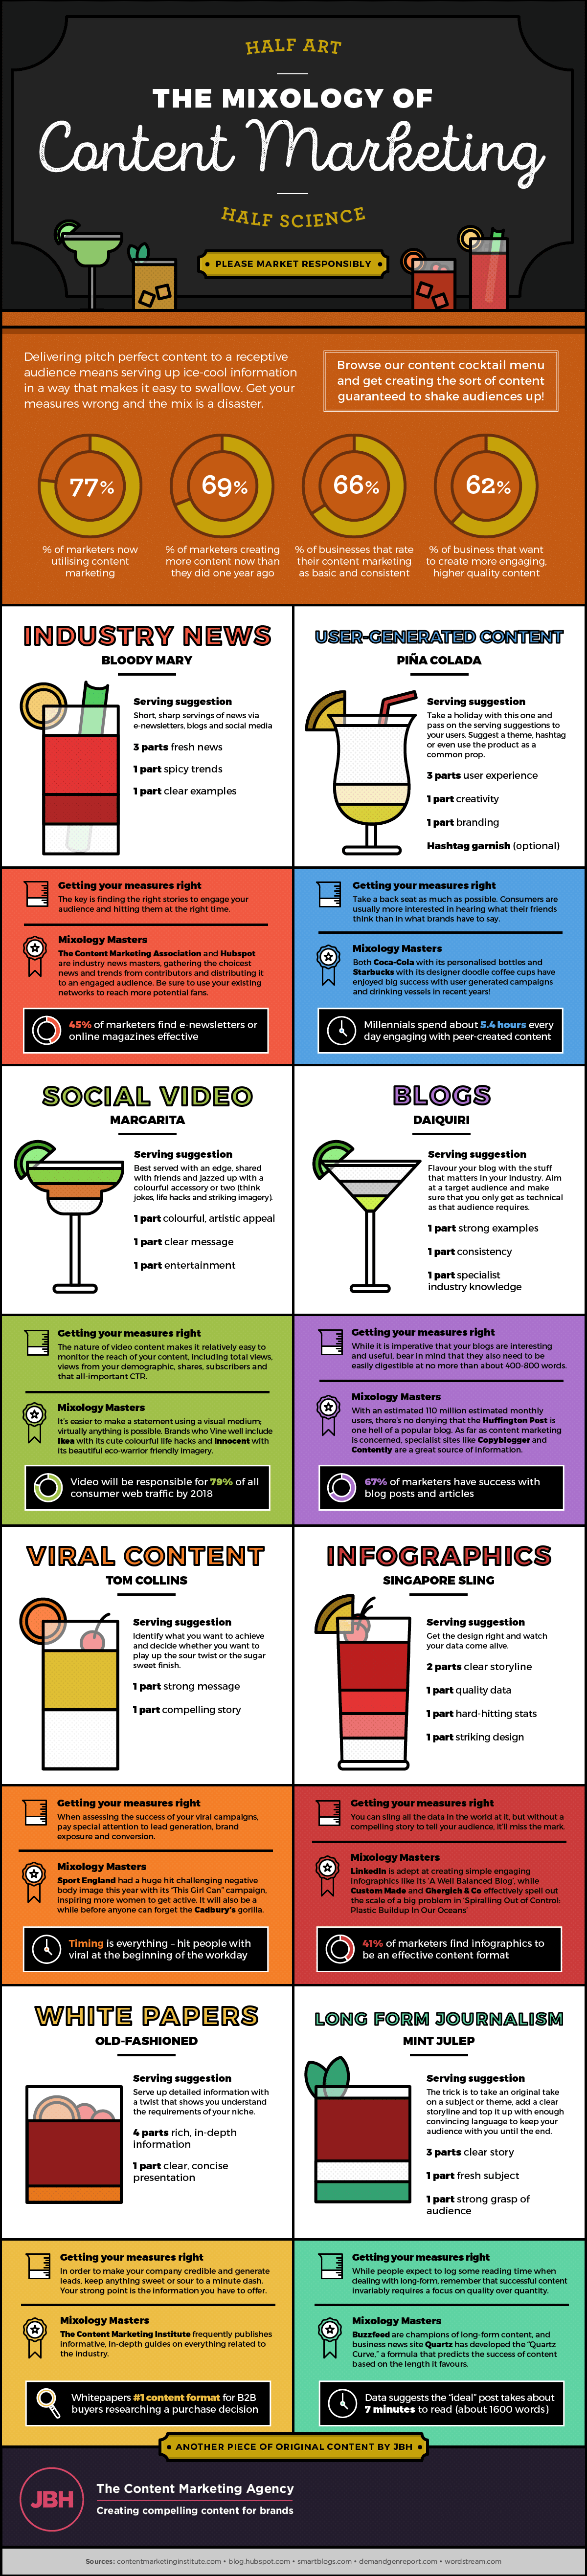 The Mixology of Content Marketing - Infographic